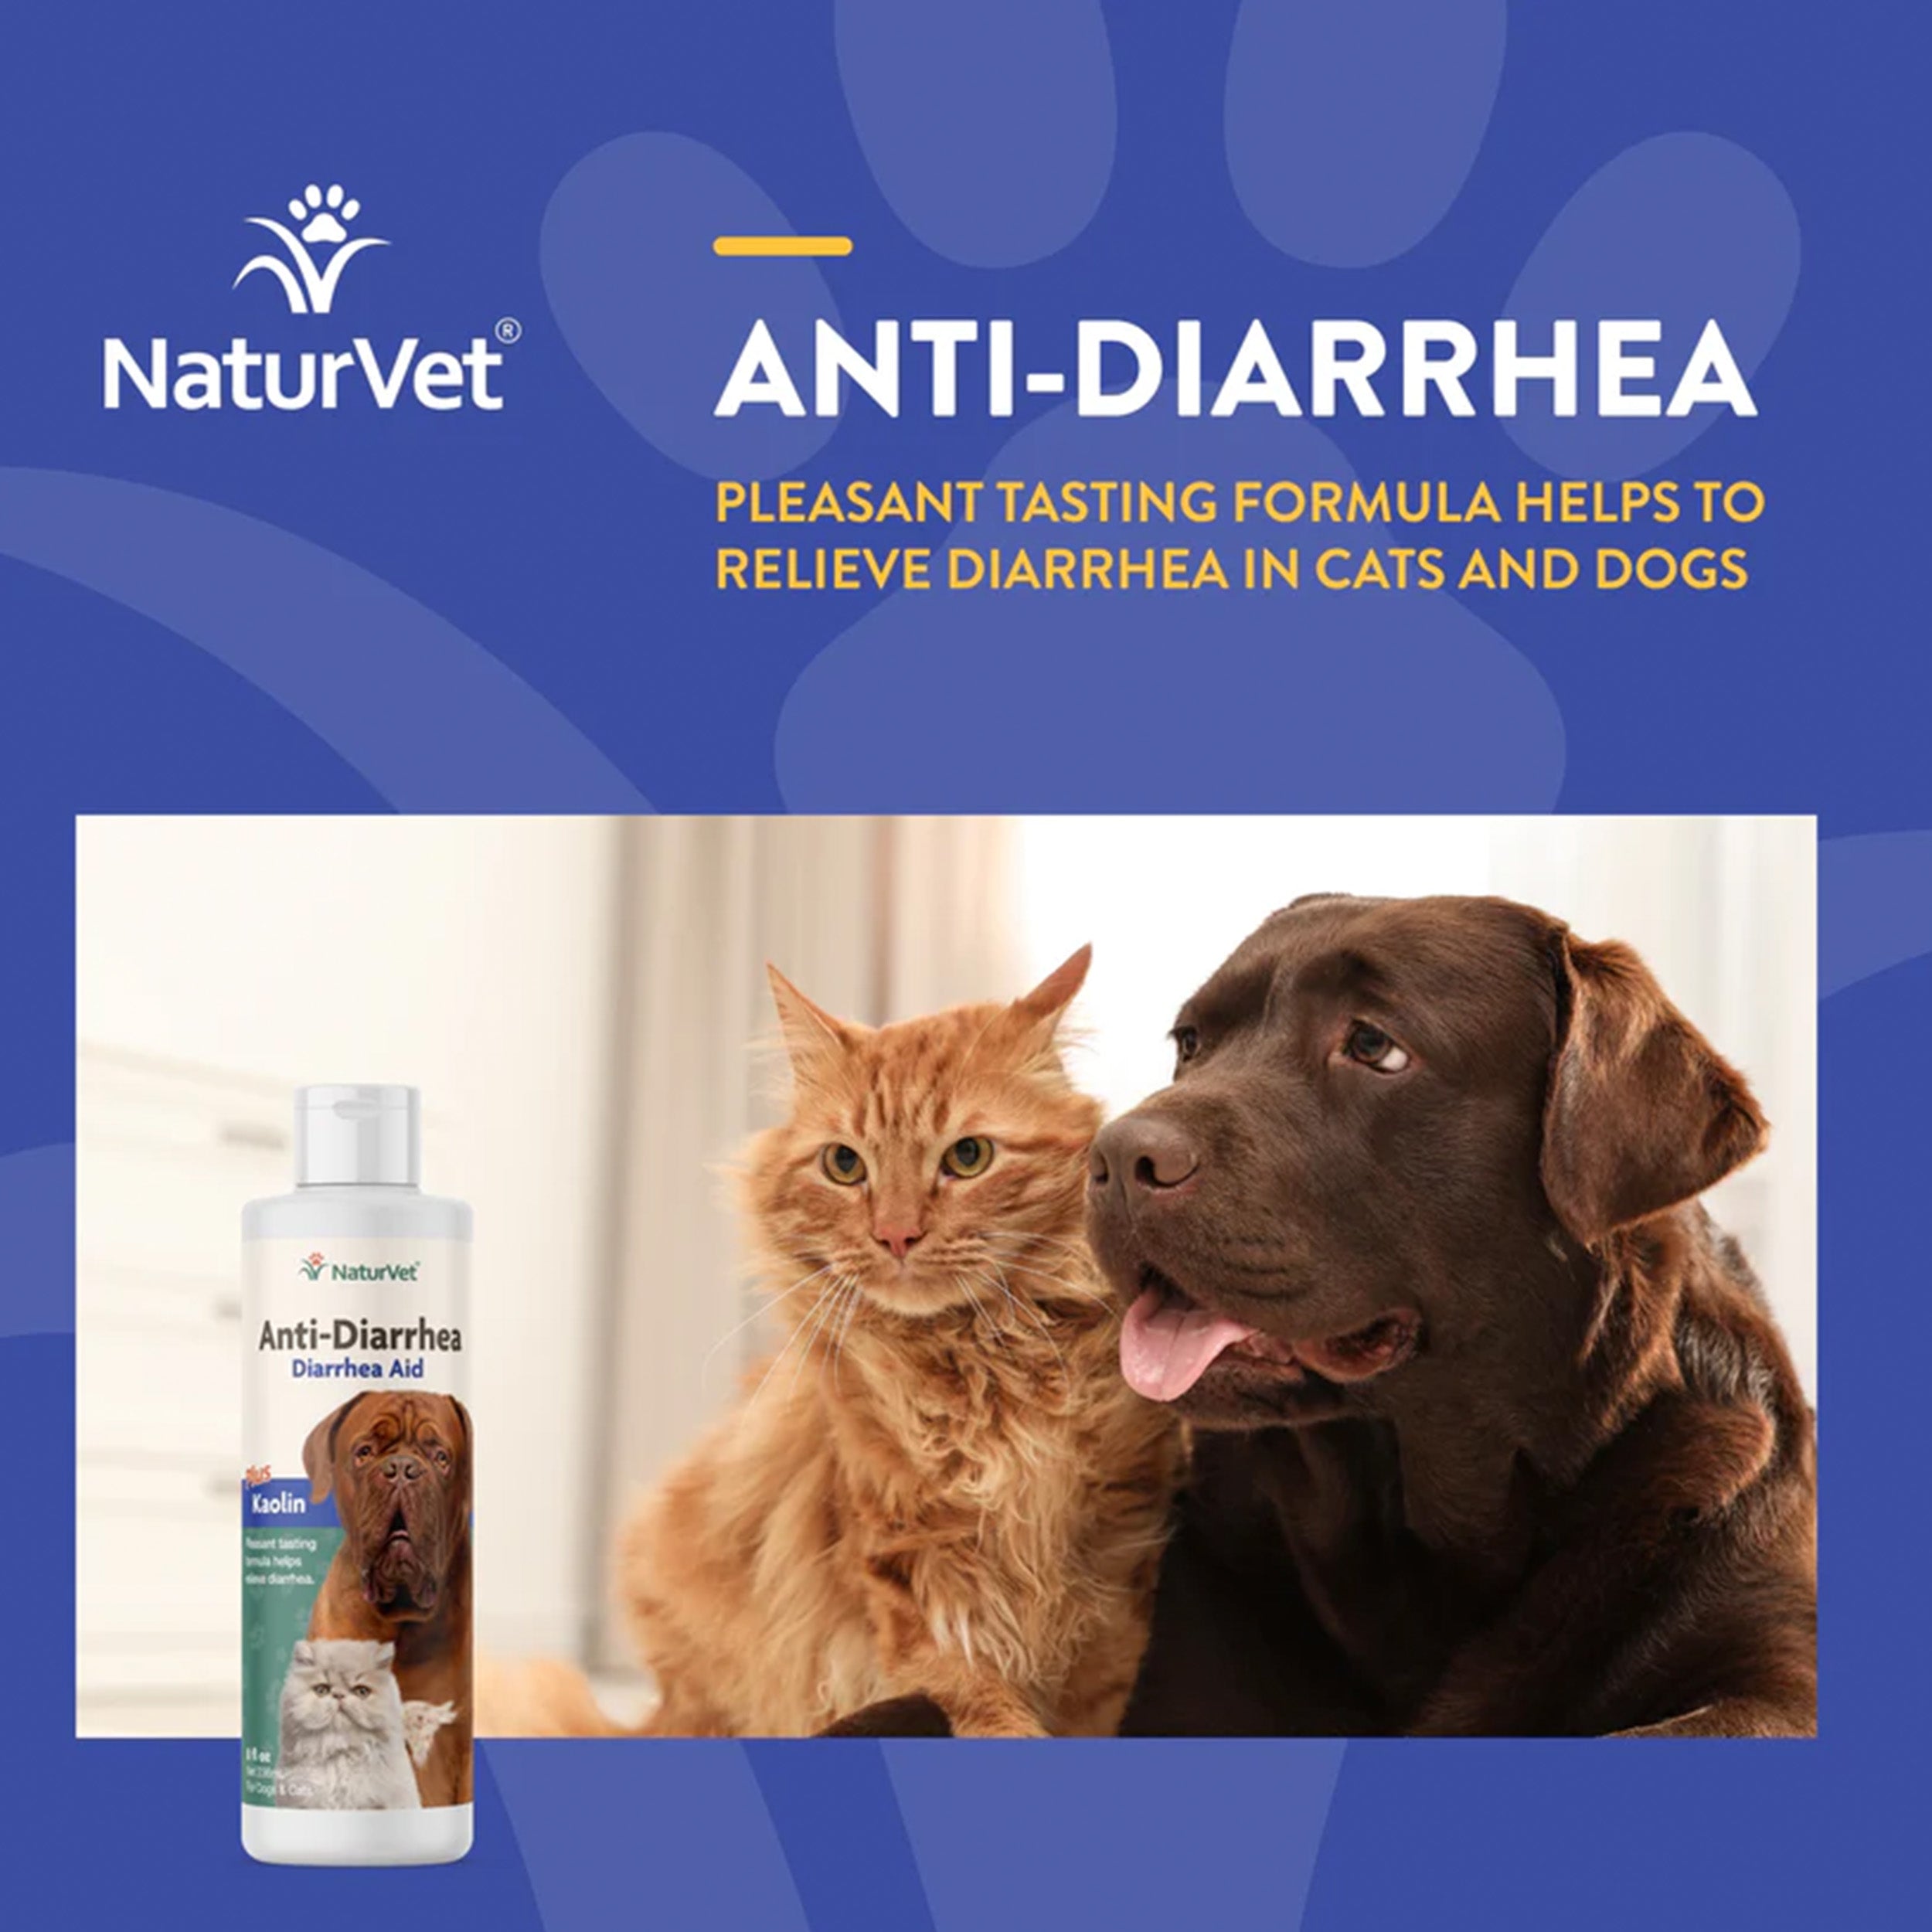 NaturVet Homeopathic Medicine for Digestive Issues & Diarrhea, 8-oz